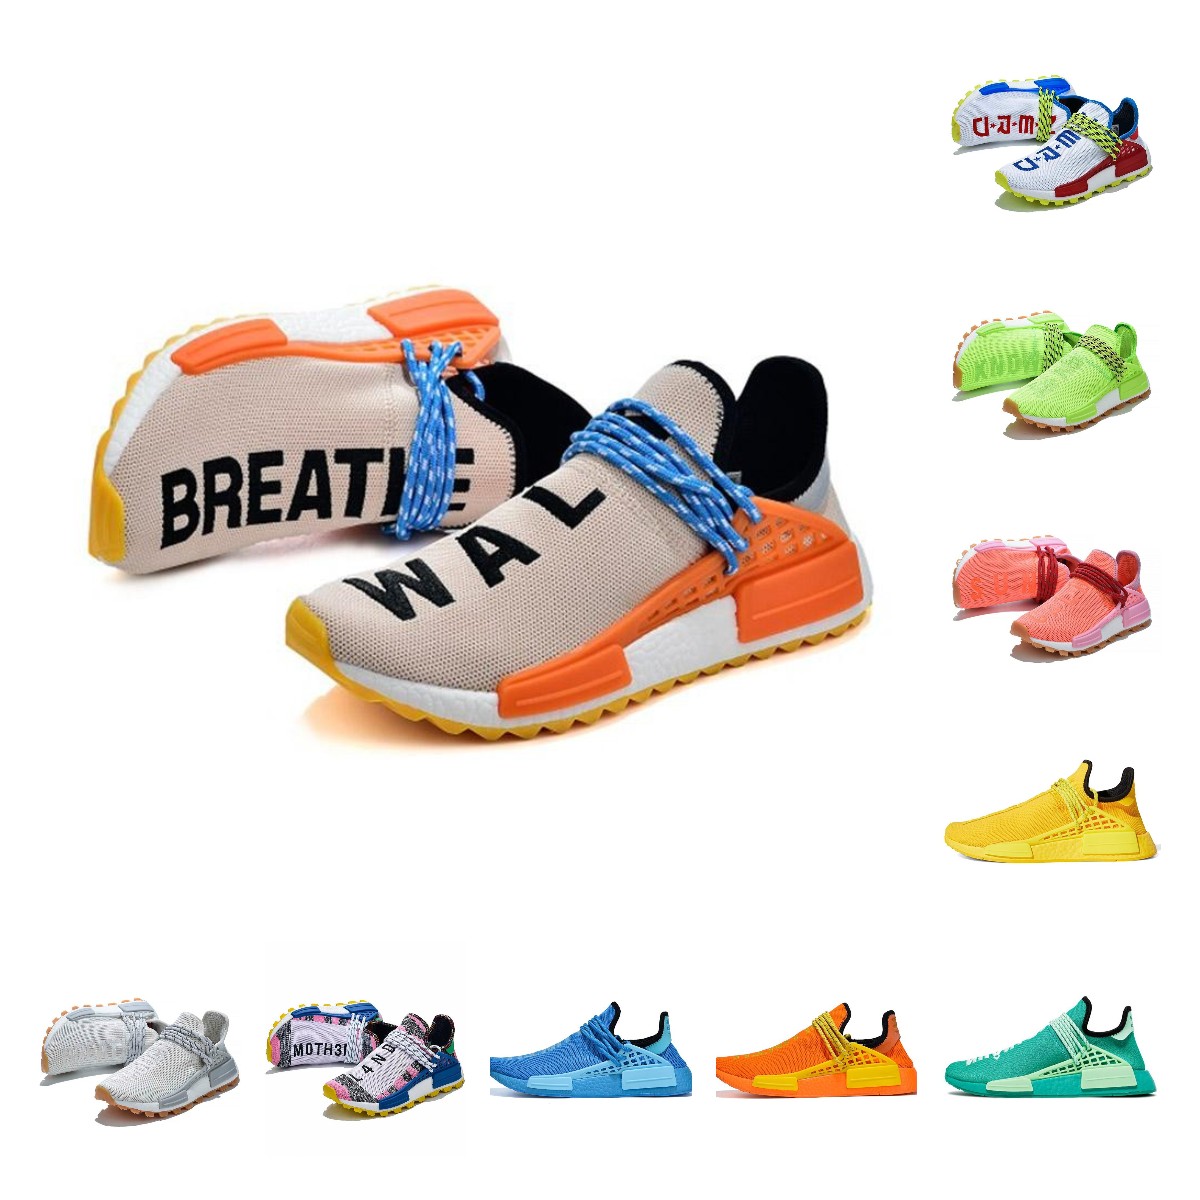 

men SHOES Pharrell NMD Human race Women sneaker Mens Running Shoes Hu Trail Beige Volt Know Soul Nerd Solar Pack BBC Extra Eye Sports Trainers Sneakers, A10 inspiration pack white 36-47